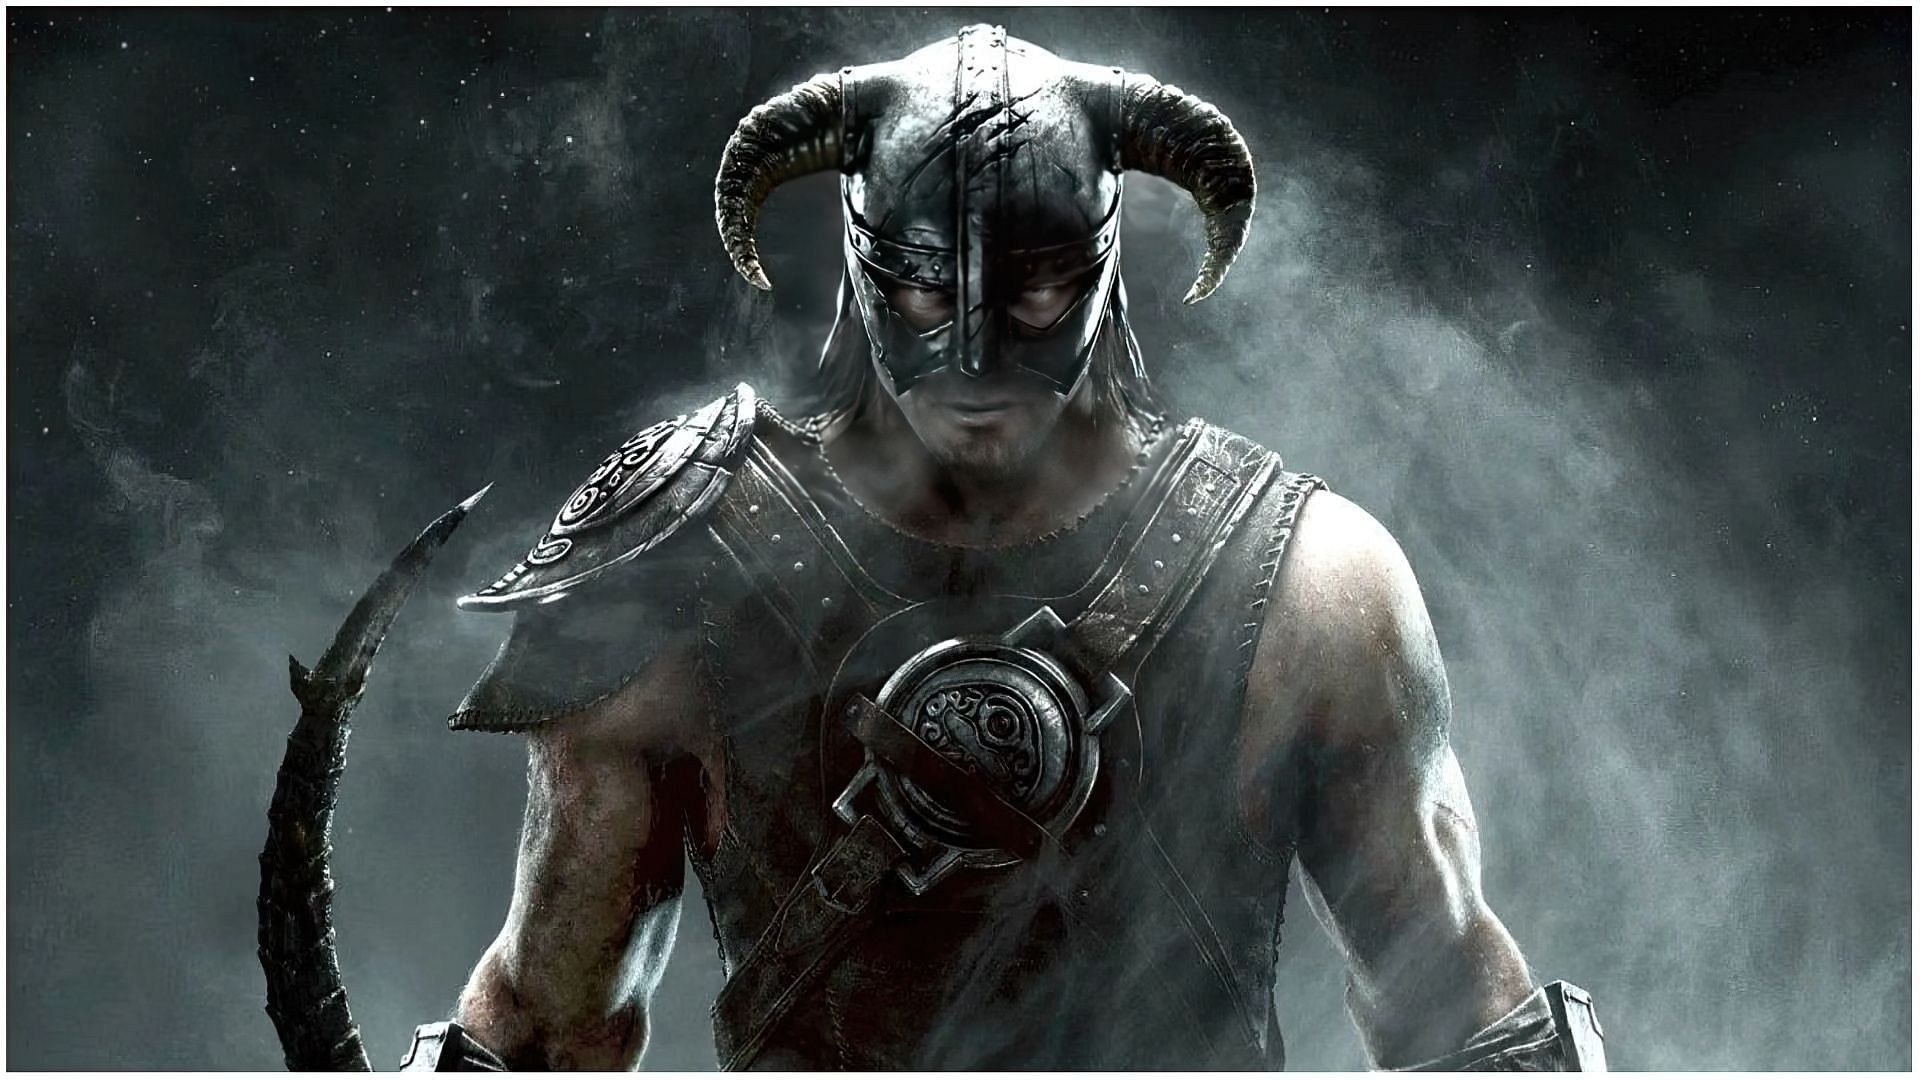 Skyrim is one of the better games for character customization (via Bethesda Softworks)